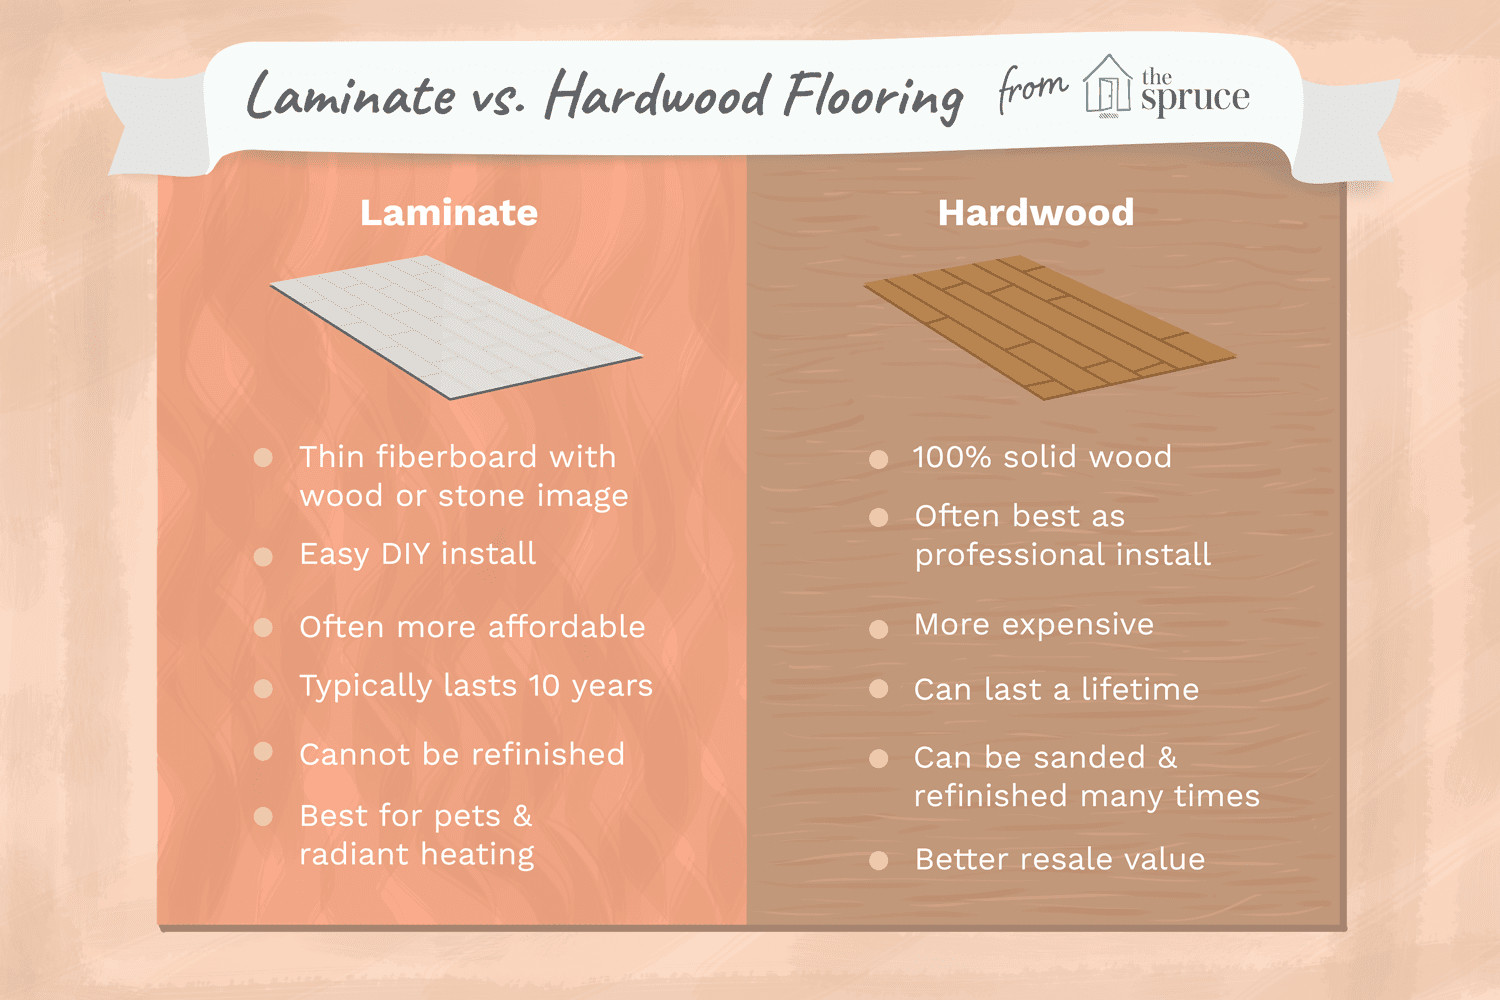 15 Awesome 3 4 Vs 1 2 Inch Engineered Hardwood Flooring 2024 free download 3 4 vs 1 2 inch engineered hardwood flooring of laminate vs hardwood doesnt have to be a hard decision with laminate vs hardwood flooring how they compare 1821870 final 5bae84f24cedfd0026f42